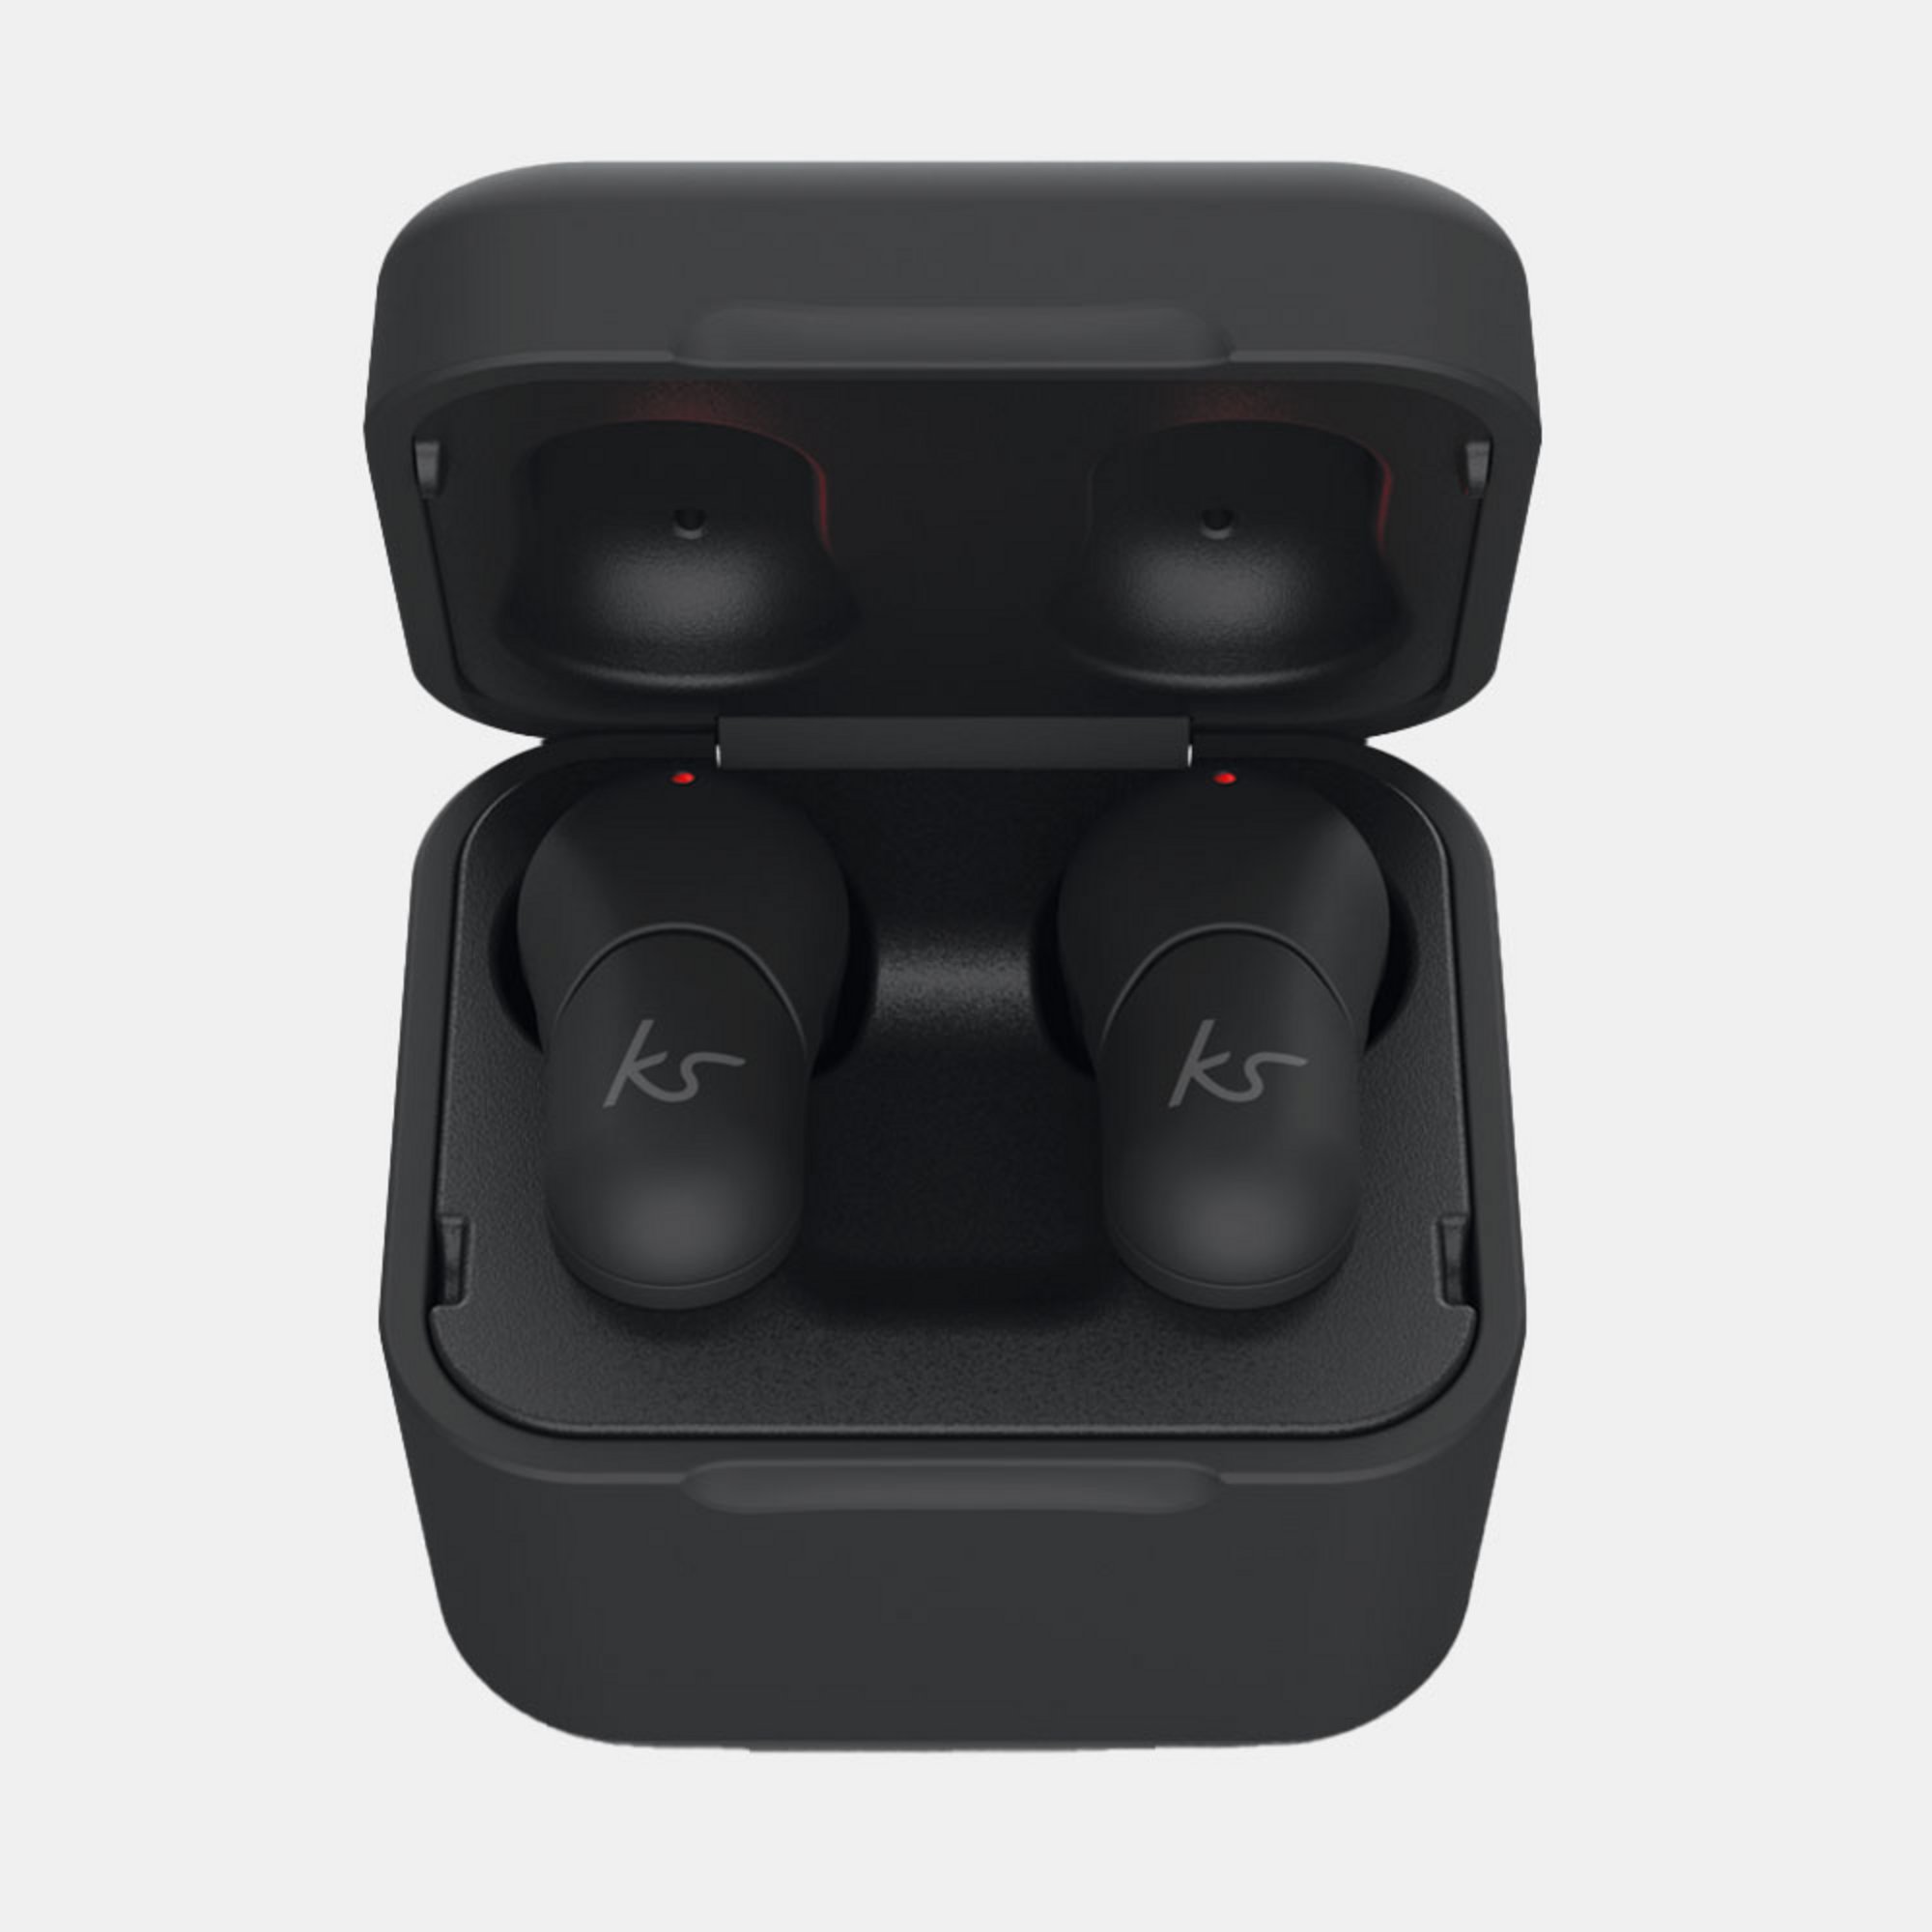 View more Mini Wireless Earbuds Black details